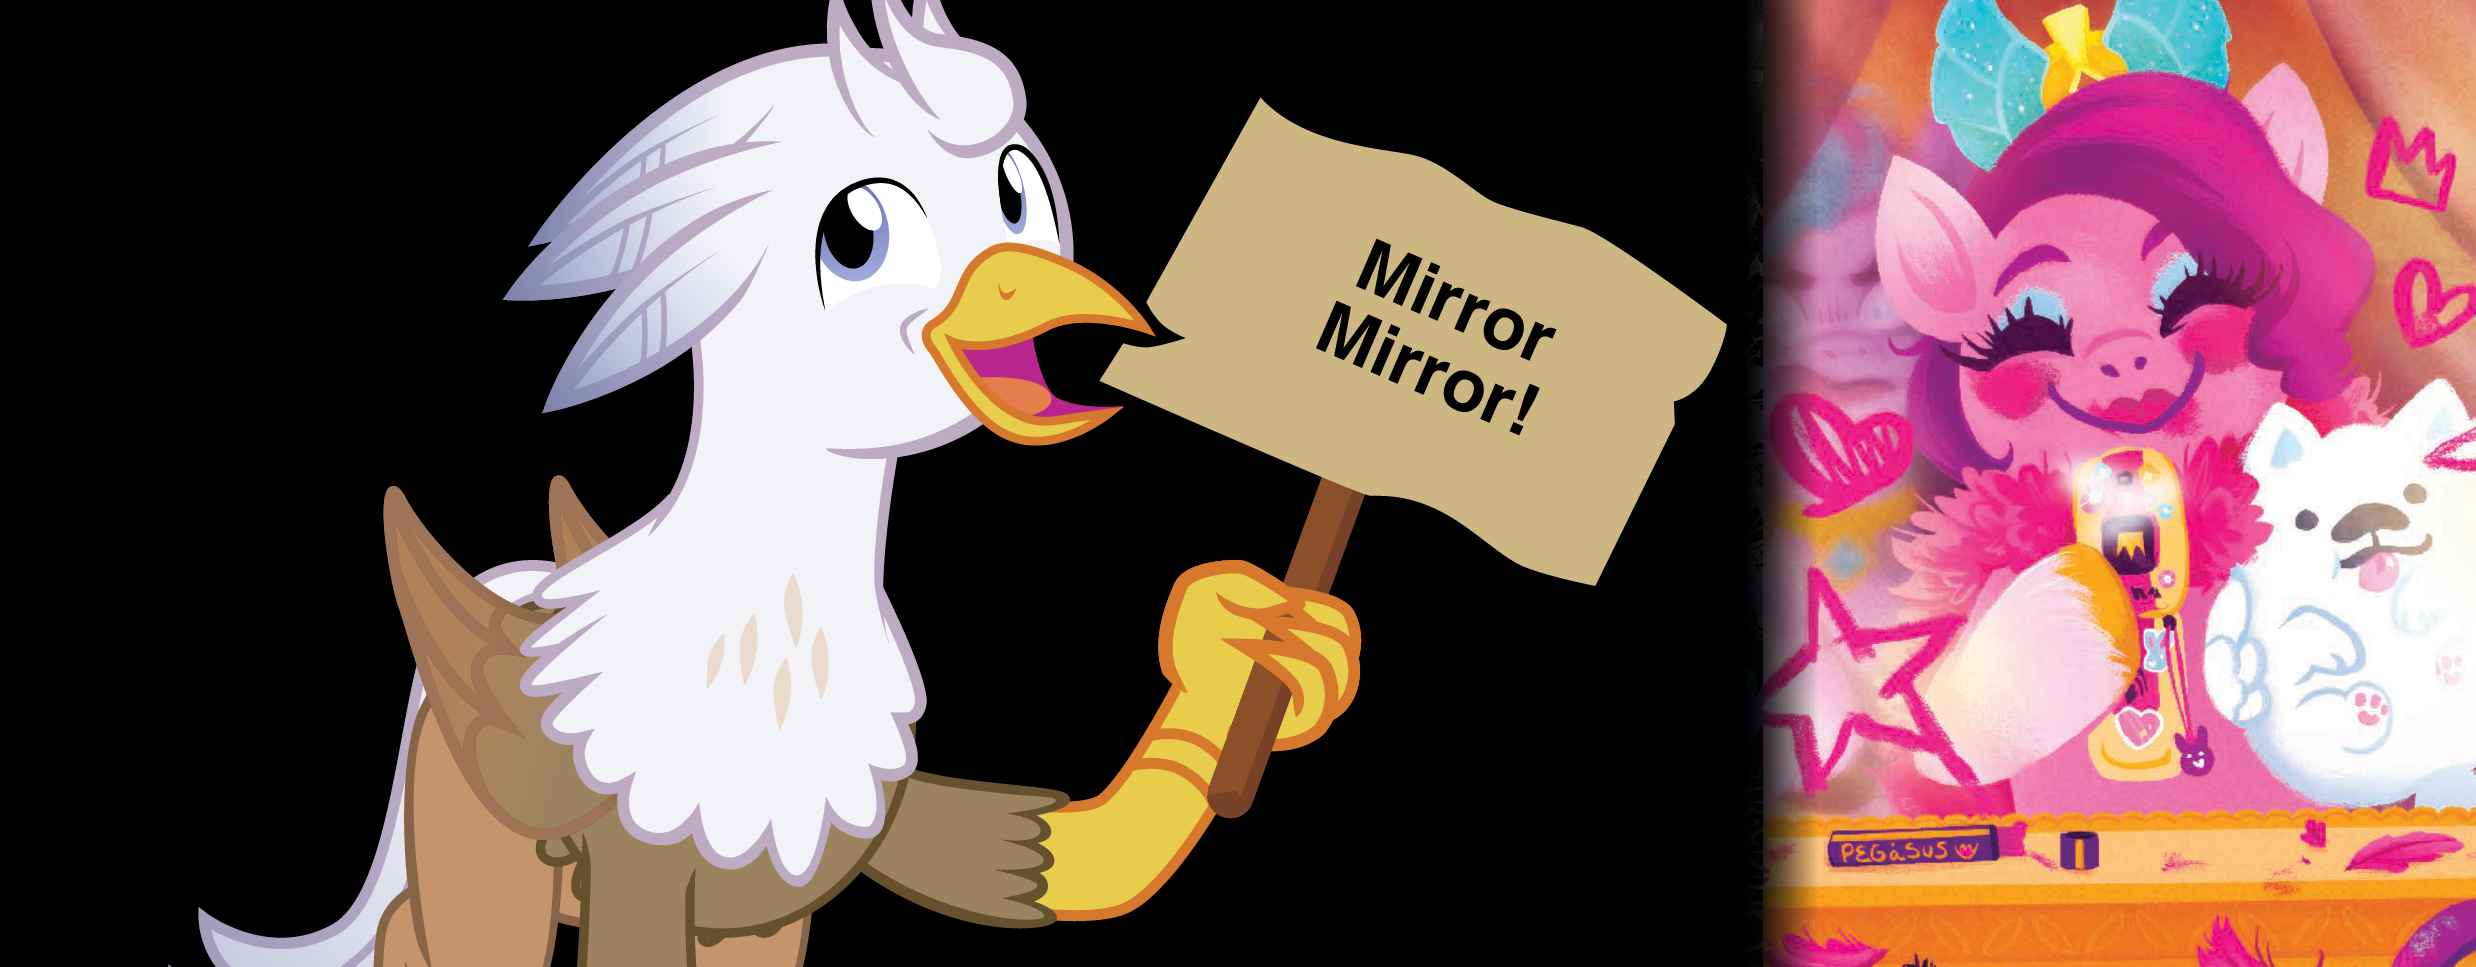 Equestria Daily - MLP Stuff!: Short Animations: White Happy